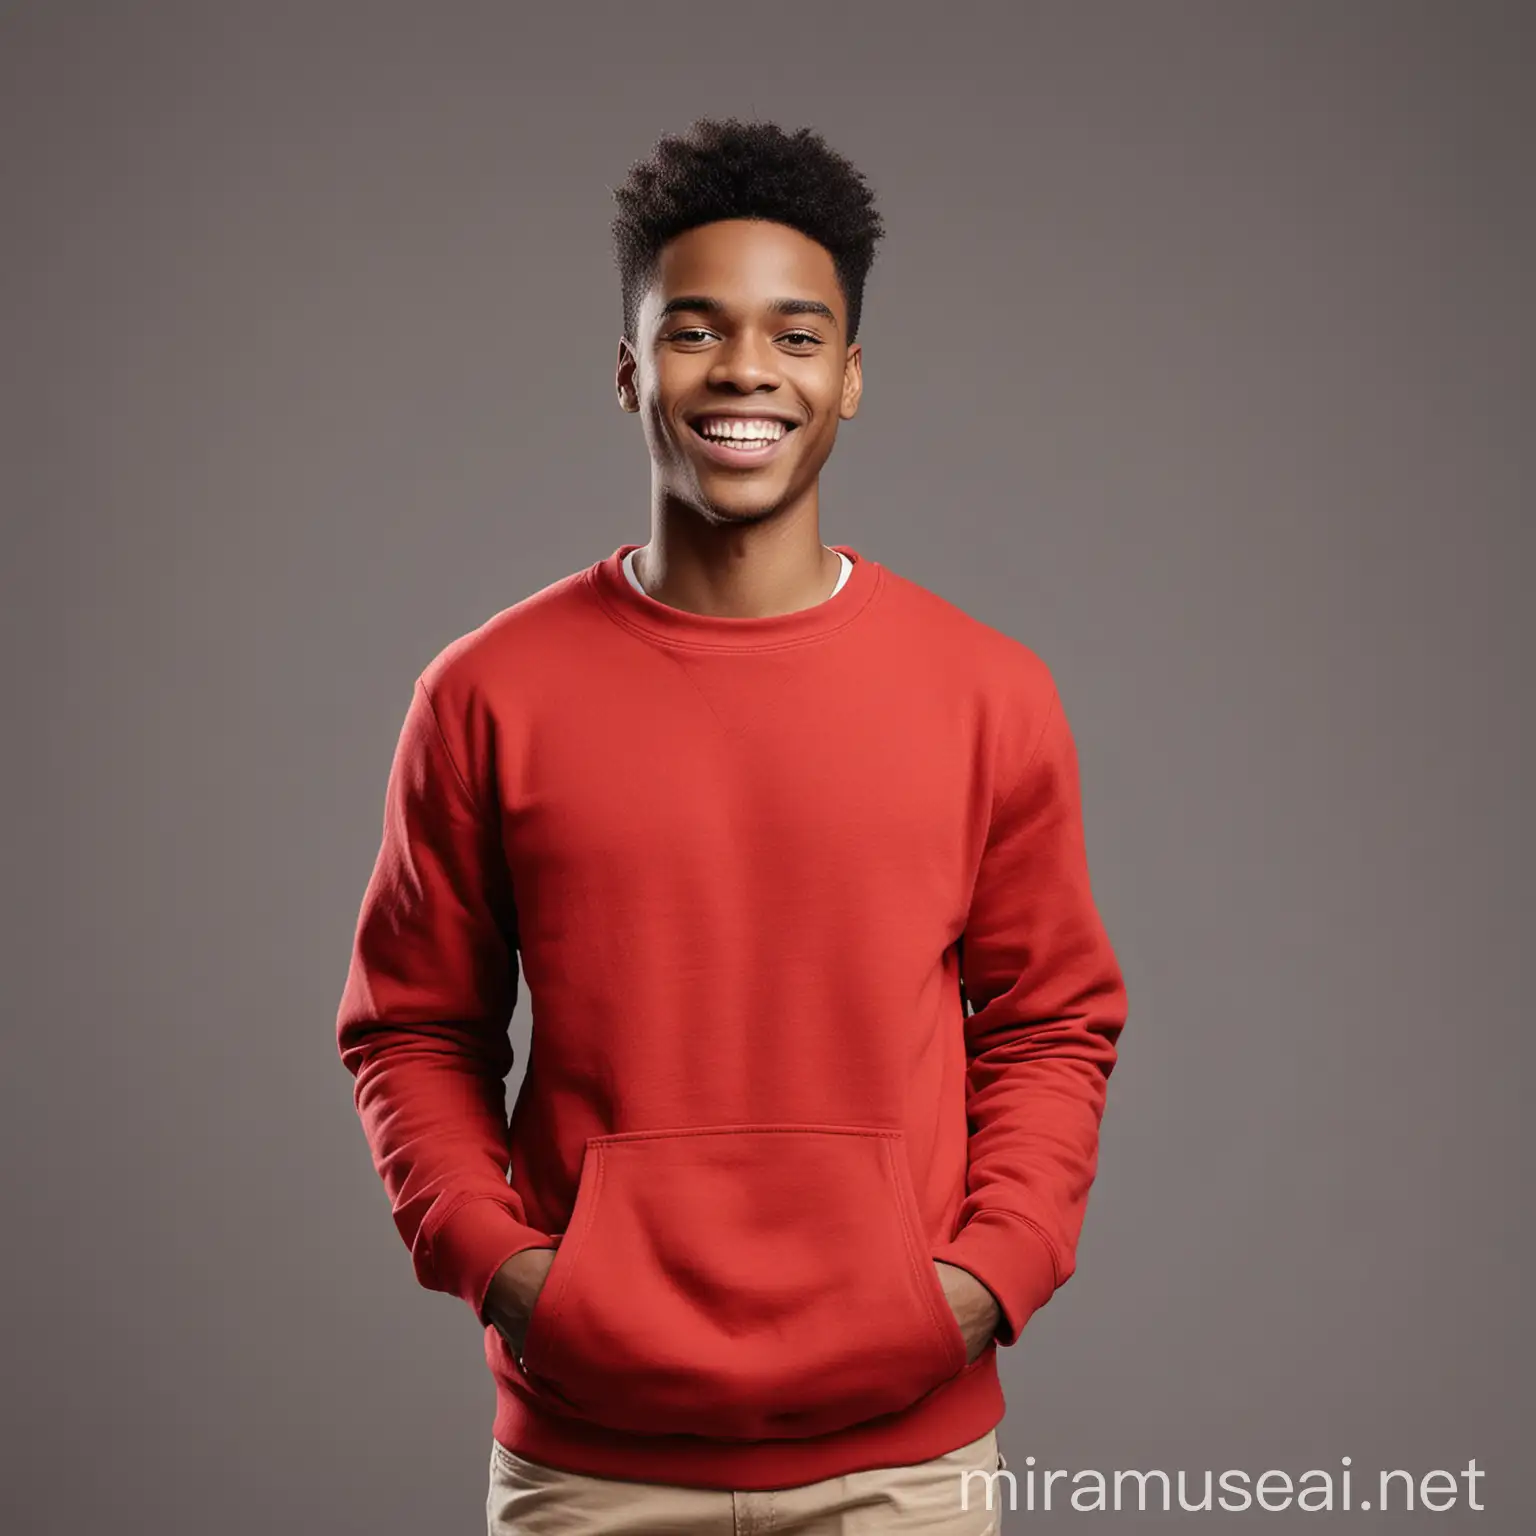 Cheerful African American Man in Red Sweatshirt Smiling at Camera